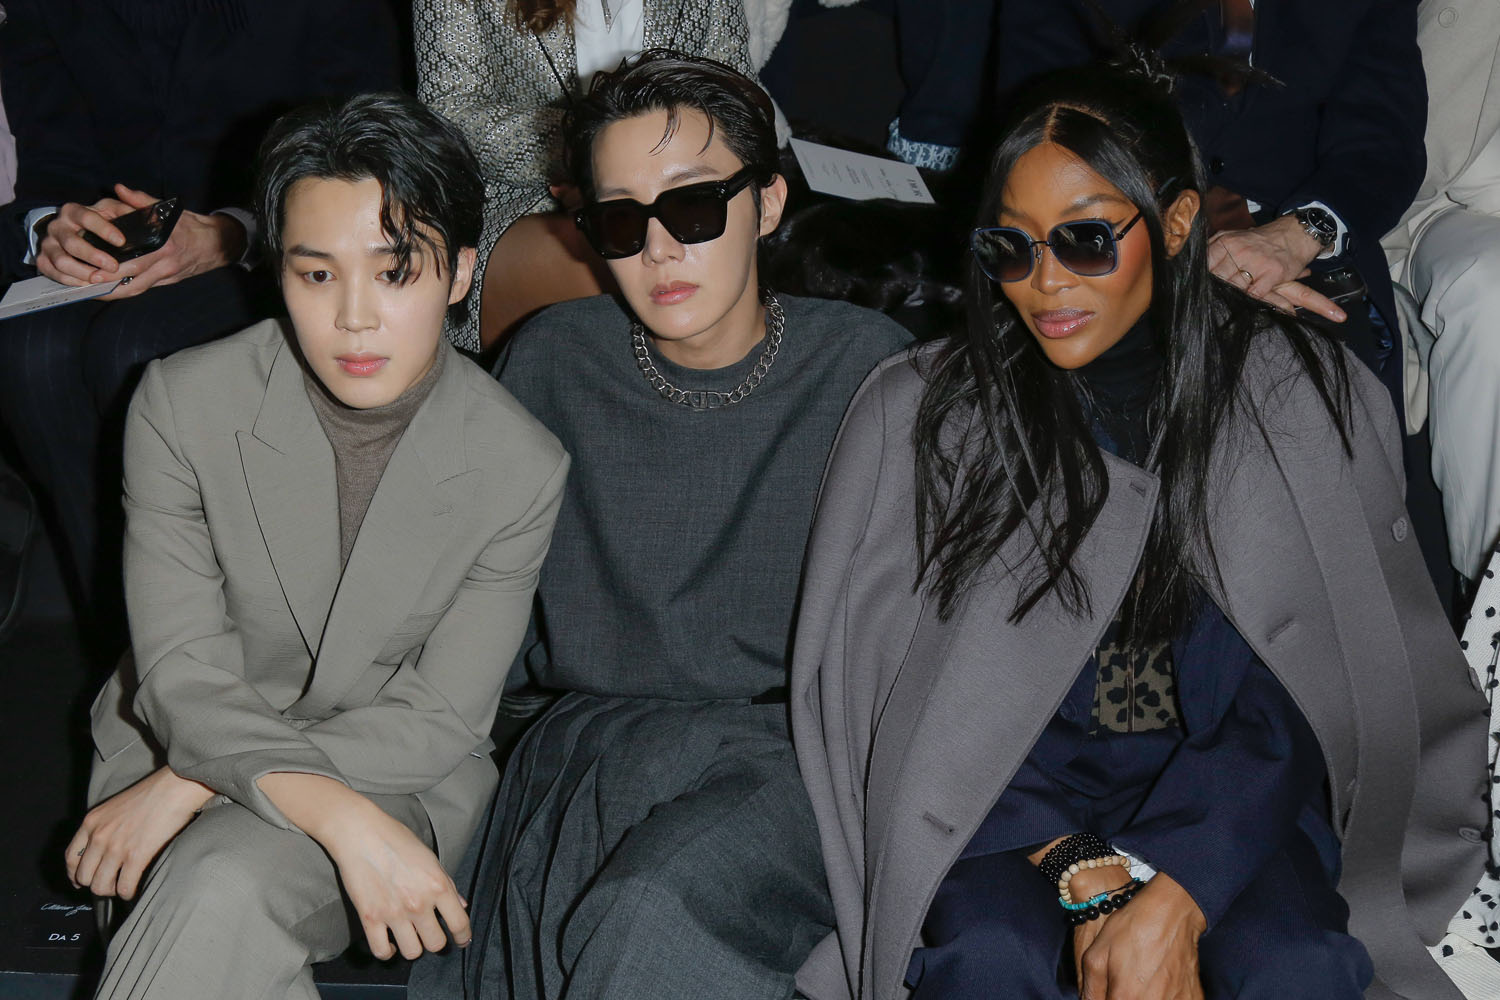 J-Hope Continues to Slay Men's Paris Fashion Week at Hermes Show